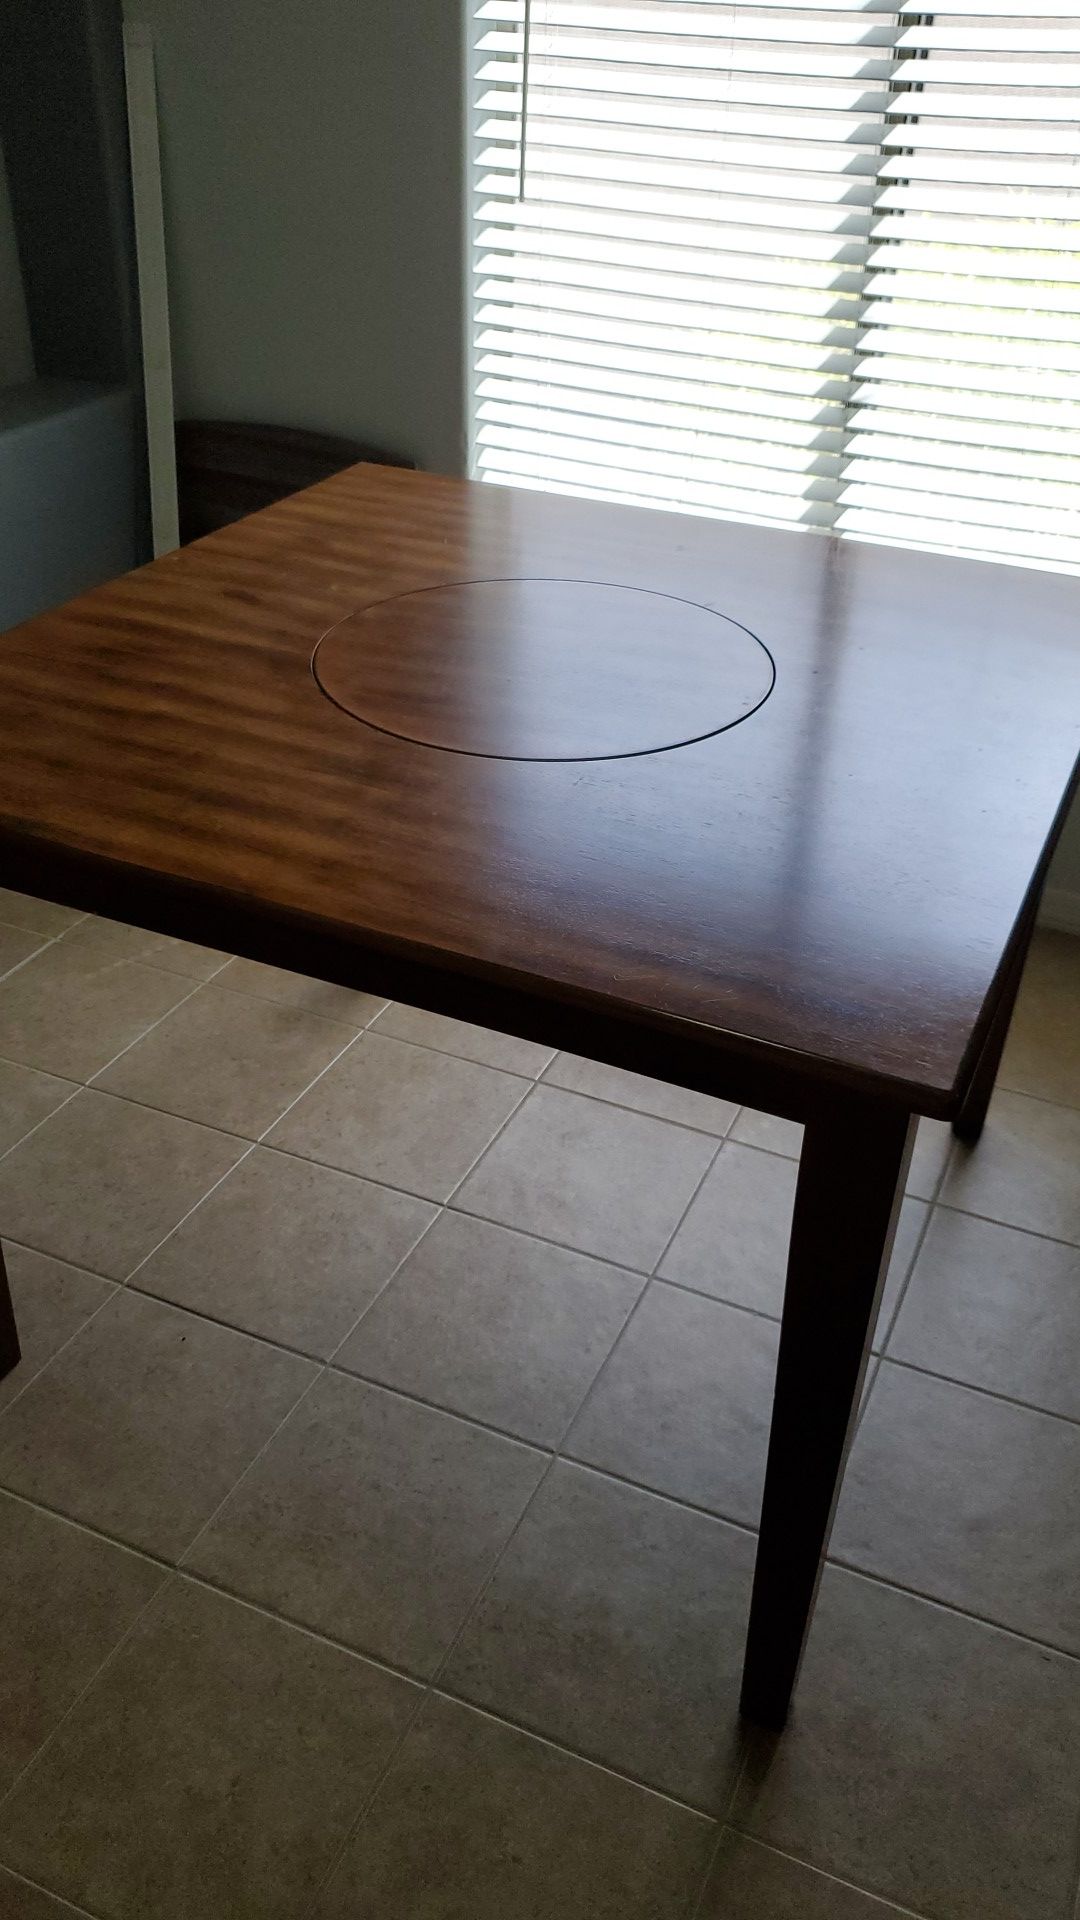 Kitchen table w/ lazy susan in the middle